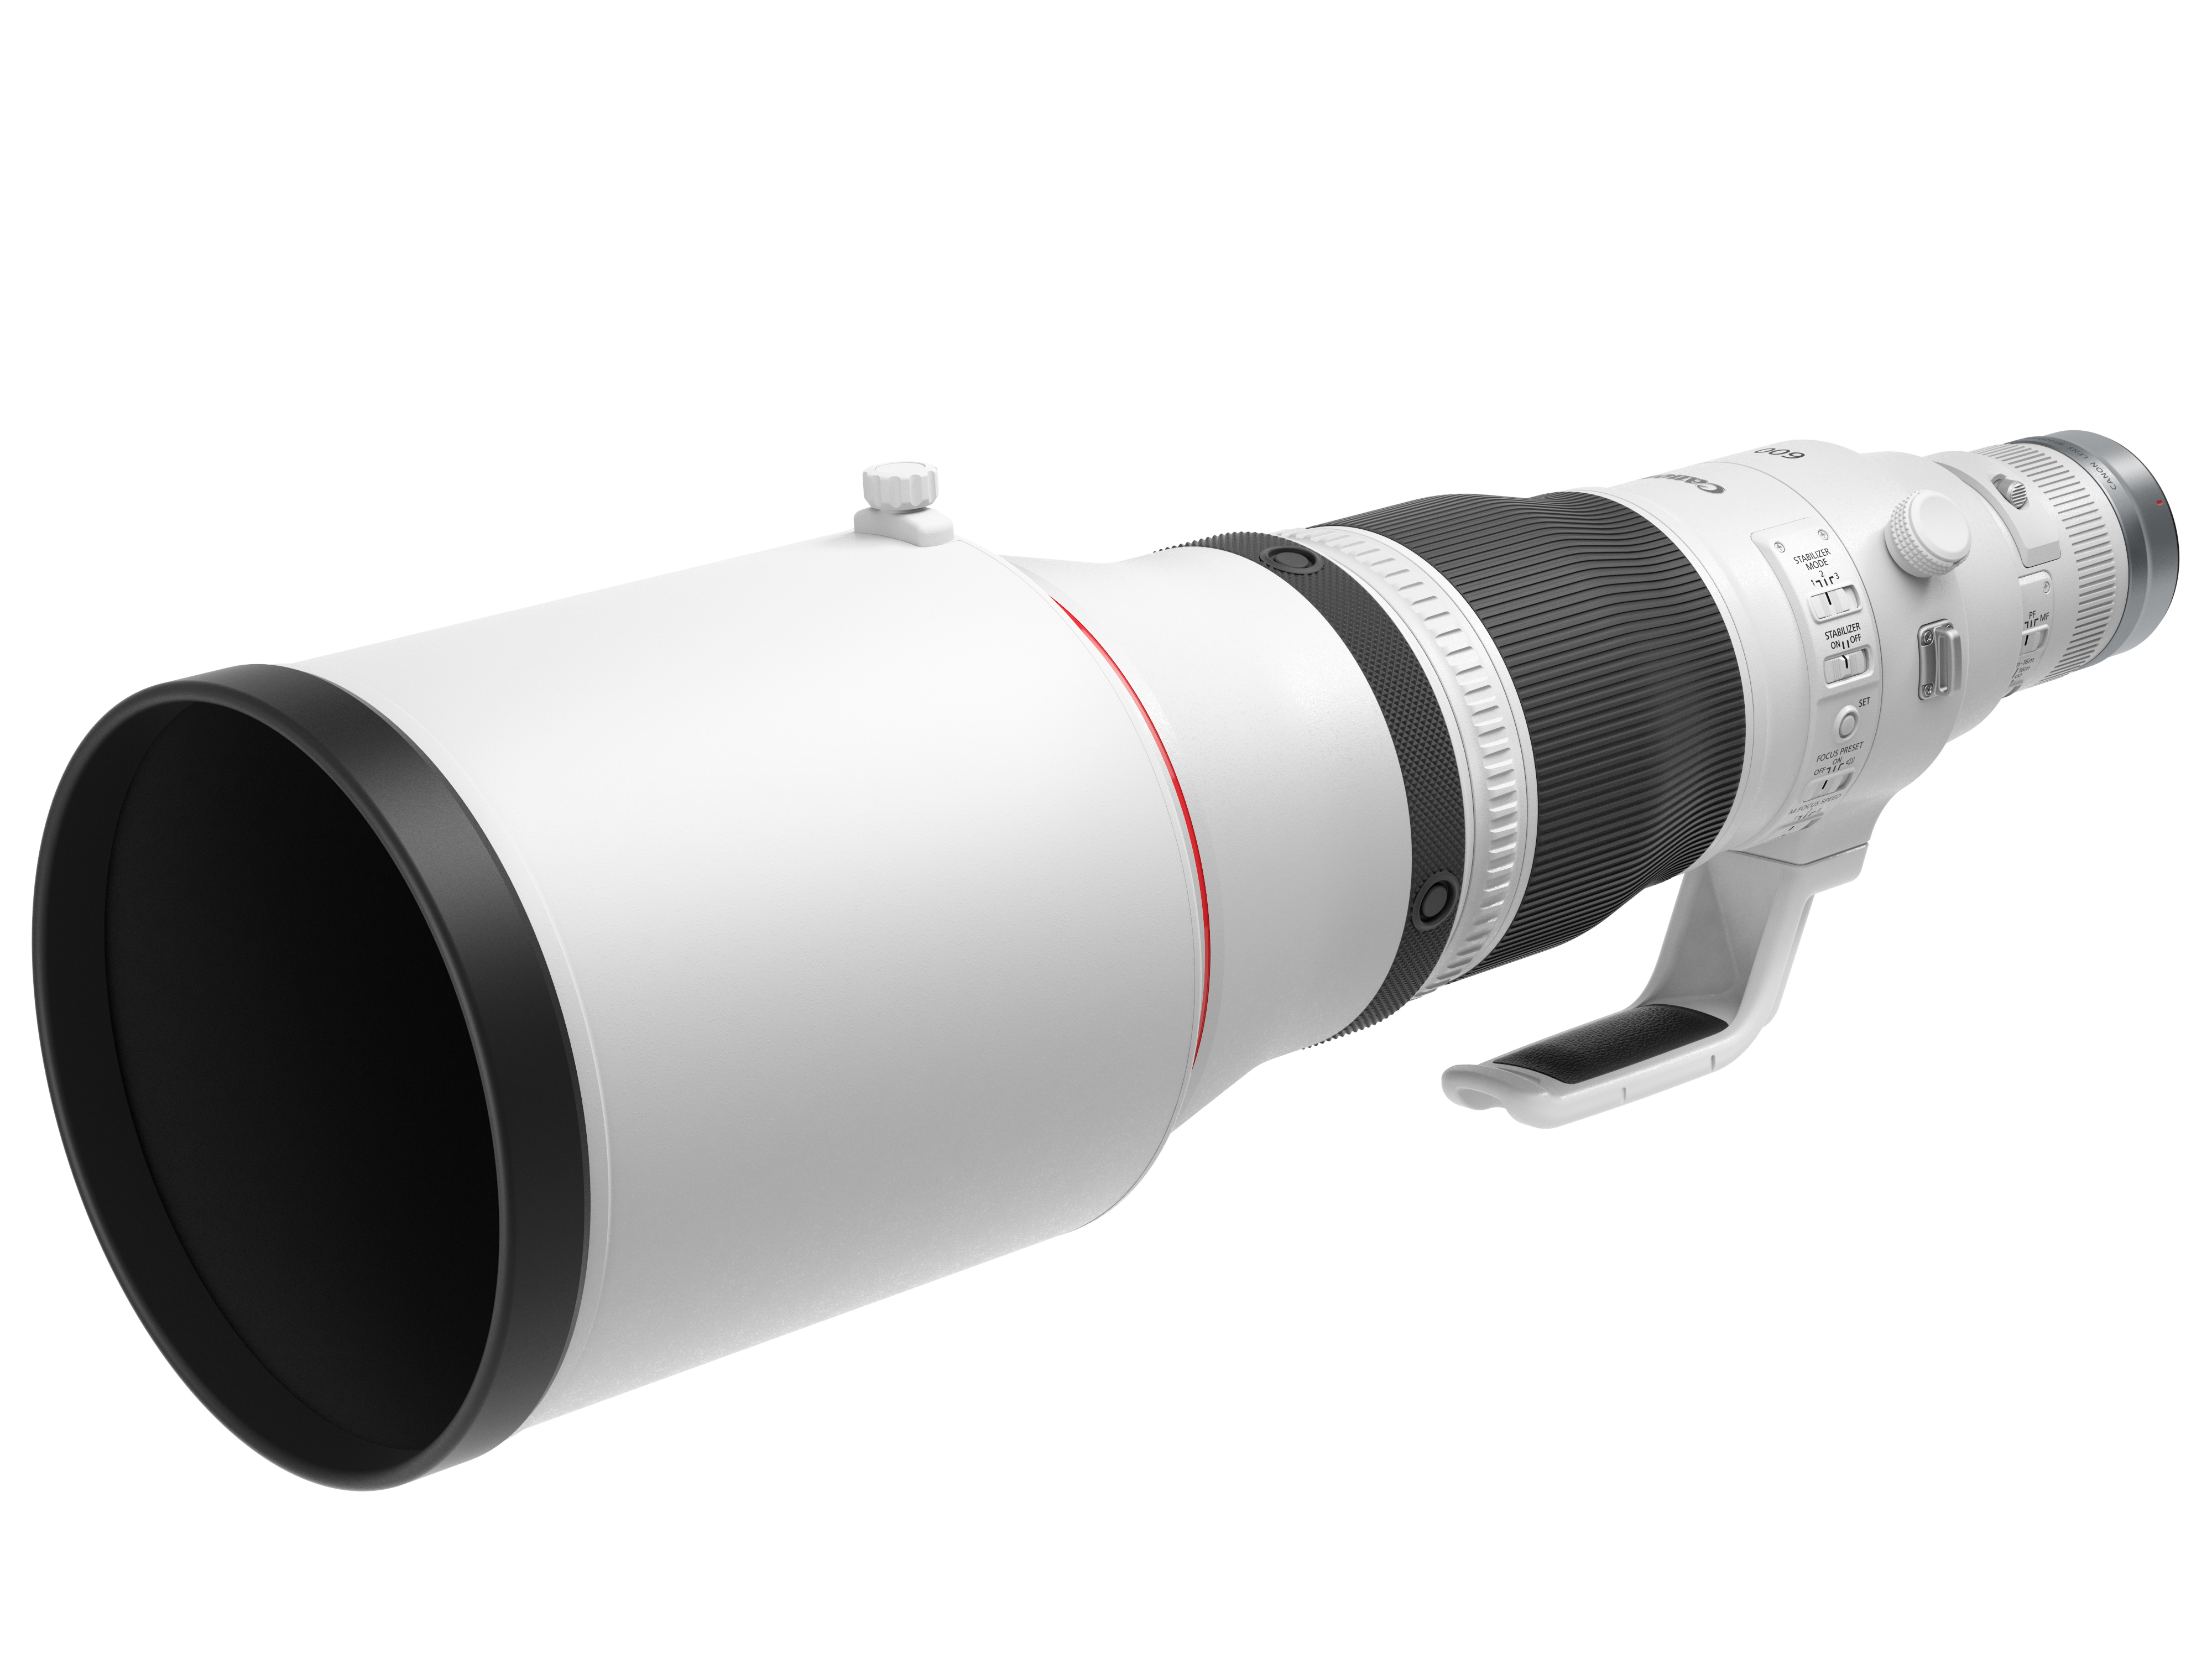 Canon RF 600mm f/4L IS USM lens